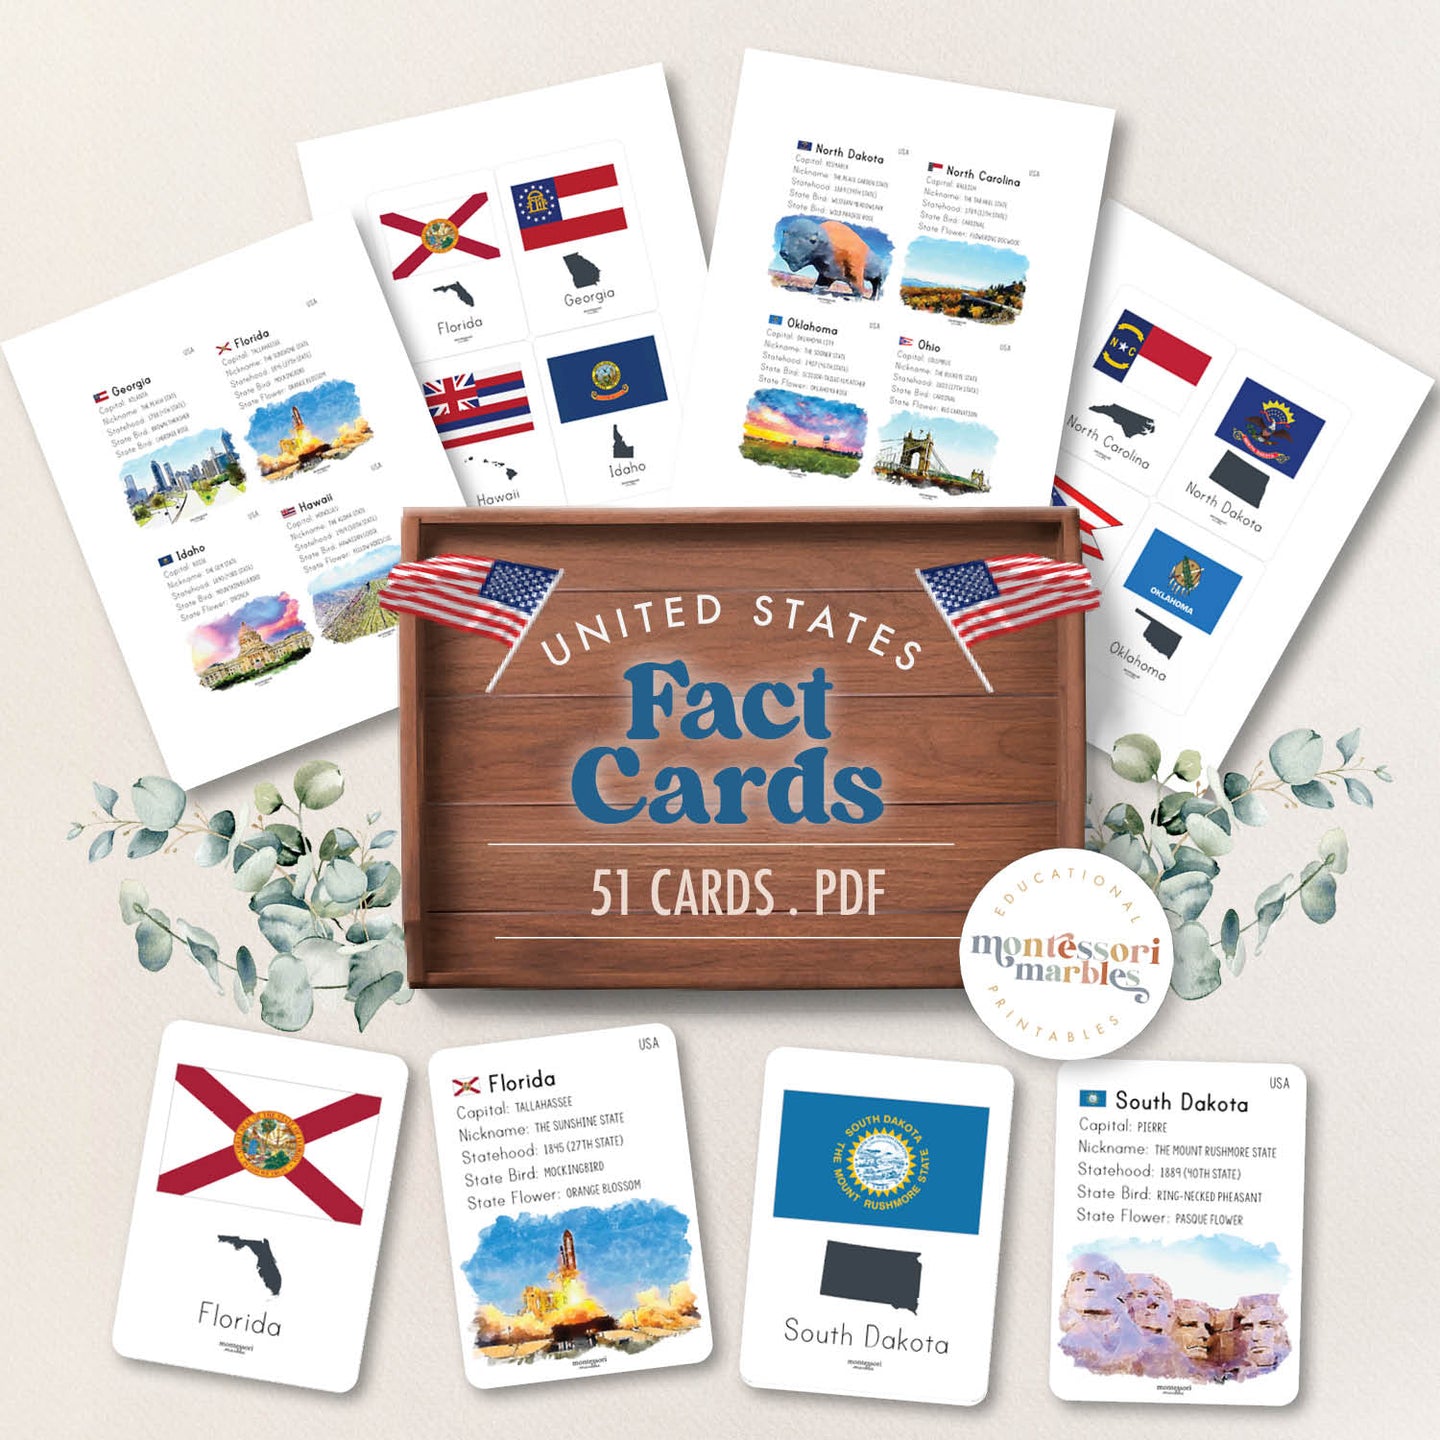 United States Fact Cards